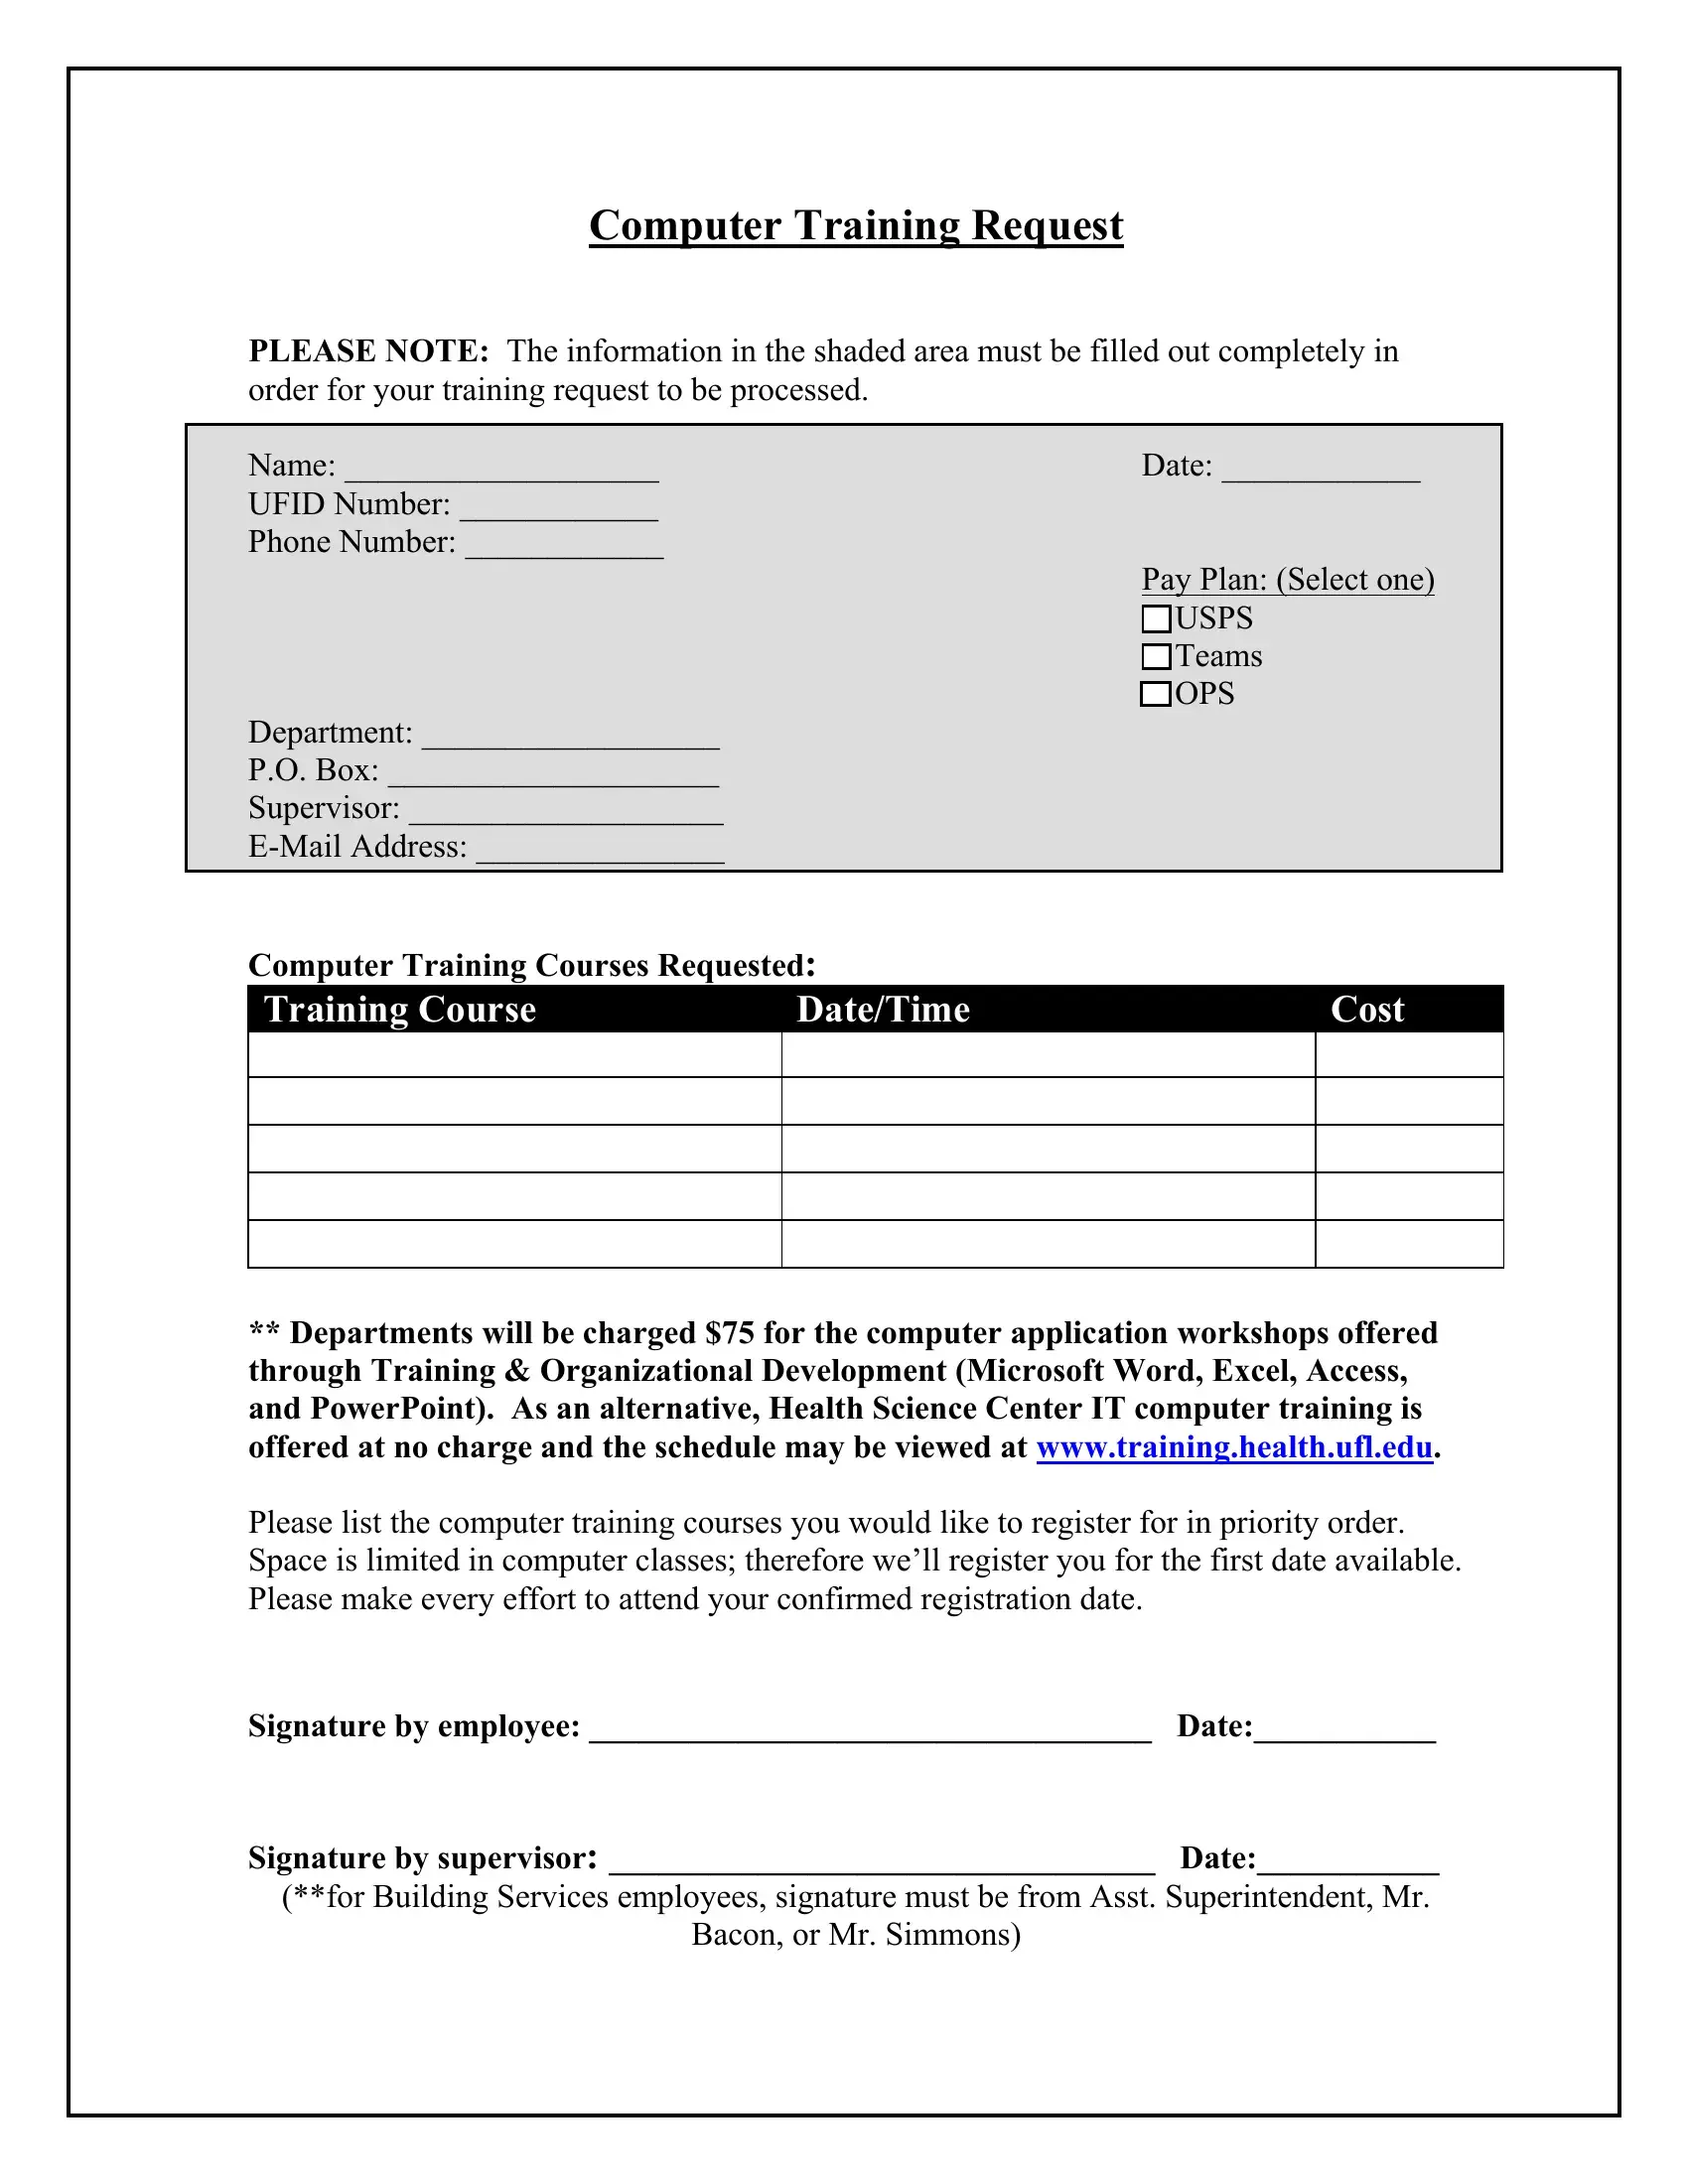 exercise chart pdf Forms and Templates - Fillable & Printable